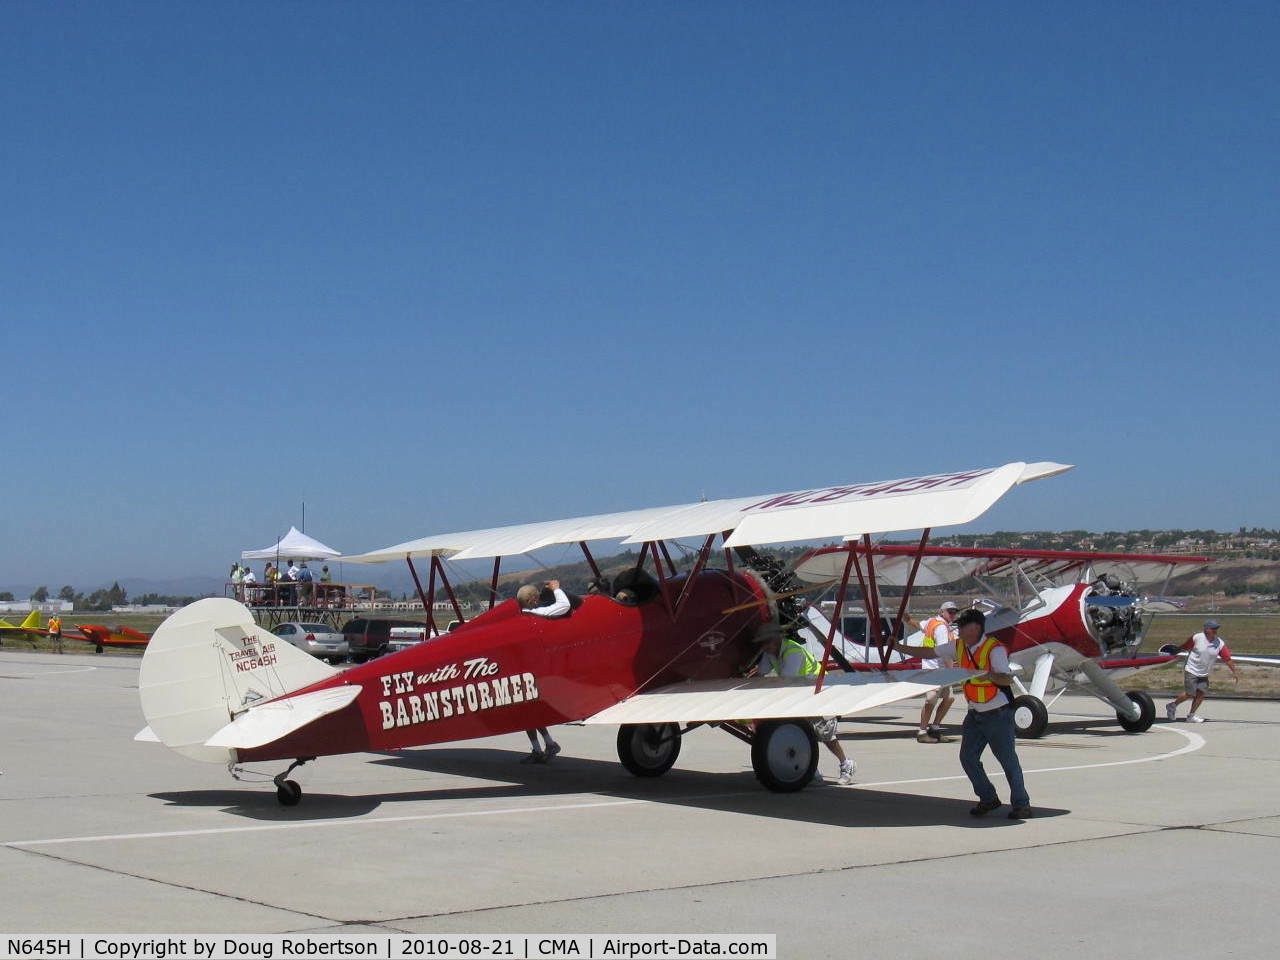 N645H, 1929 Curtiss-Wright Travel Air E-4000 C/N 1220, 1929 Curtiss-Wright TRAVEL AIR E-4000, Lycoming R-680 upgrade, pushback